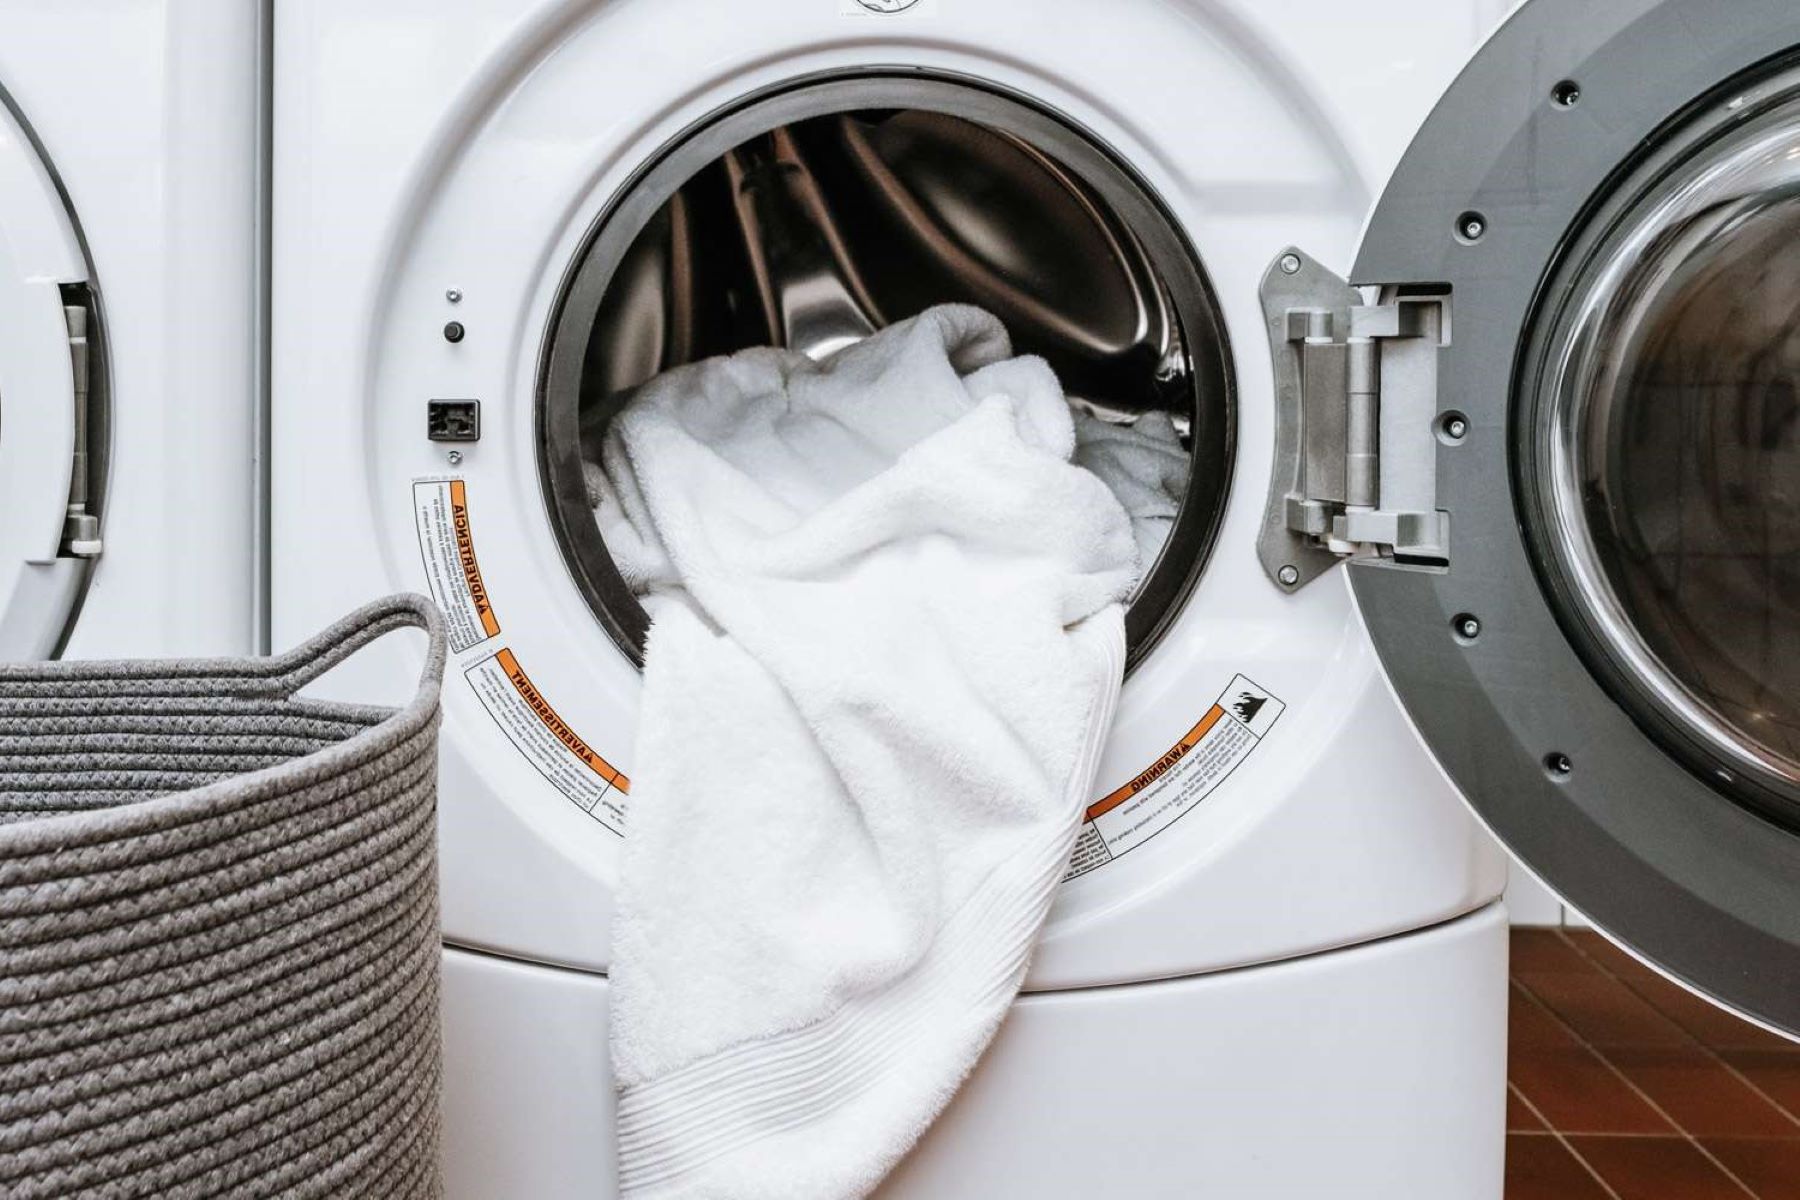 How To Use A Front Loader Washing Machine